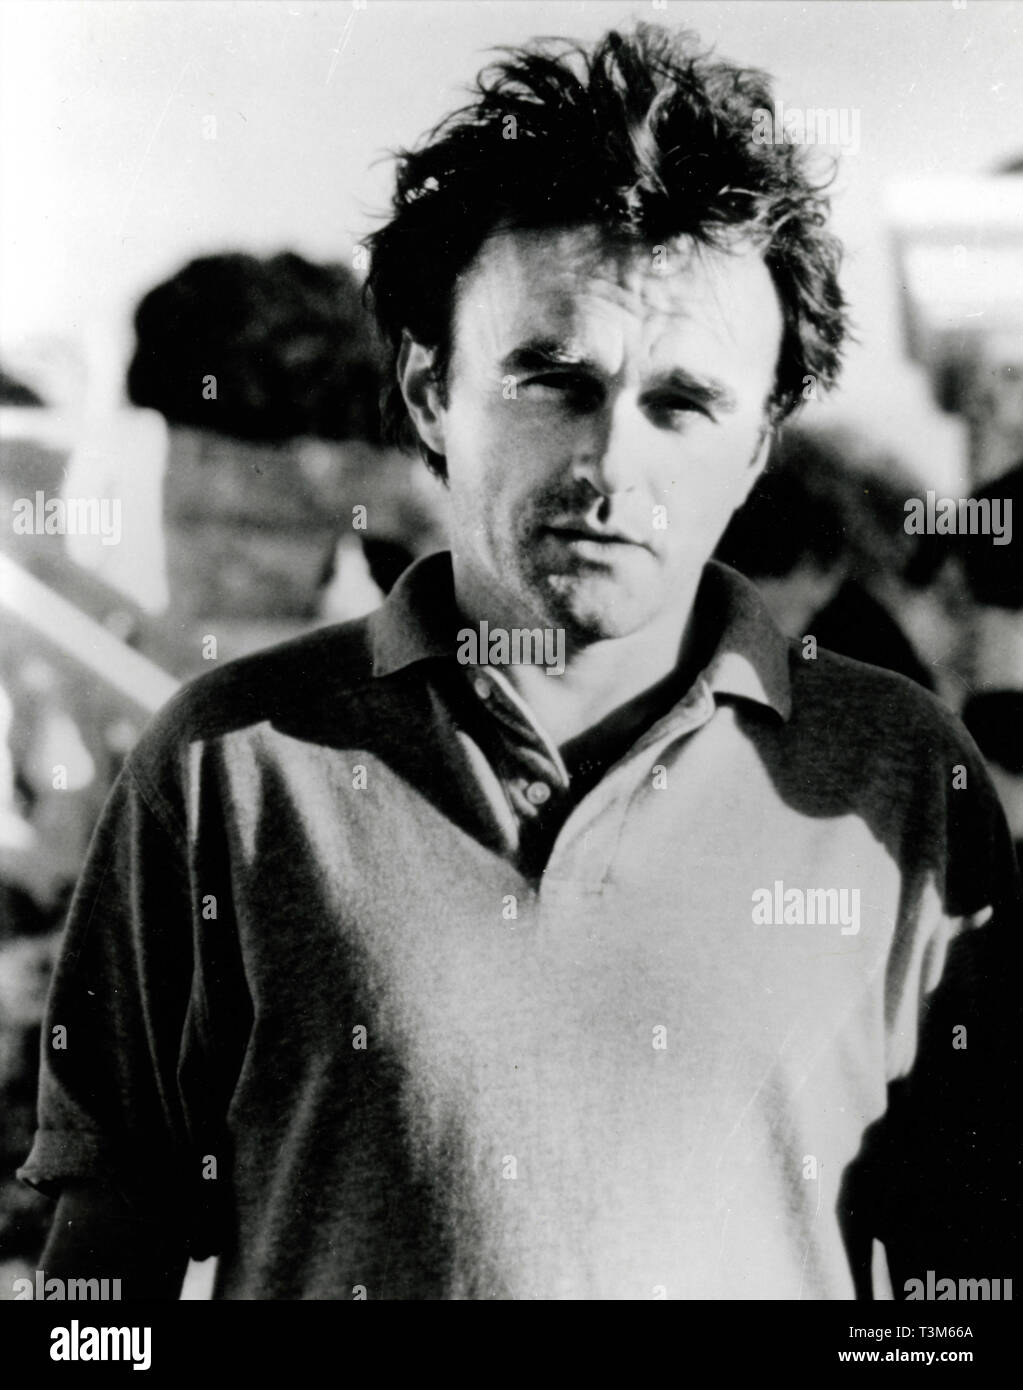 Danny Boyle in the movie A Life Less Ordinary, 1997 Stock Photo